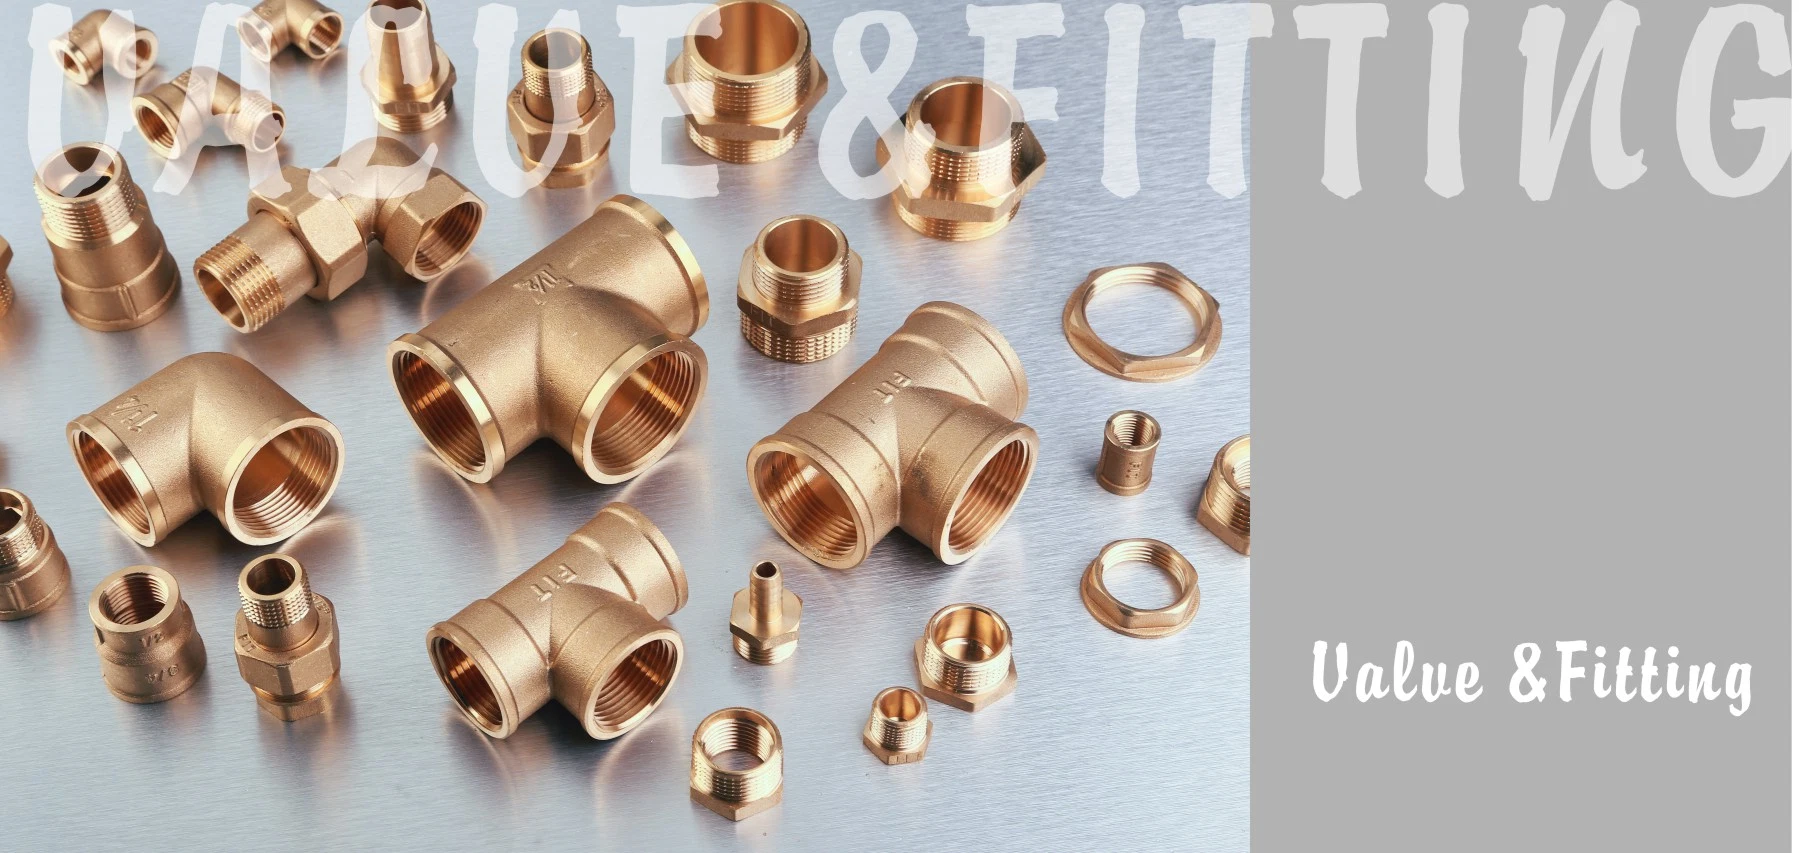 Copper Elbow Joint Connector Brass Pipe Fittings for Plumbing (MK10106)